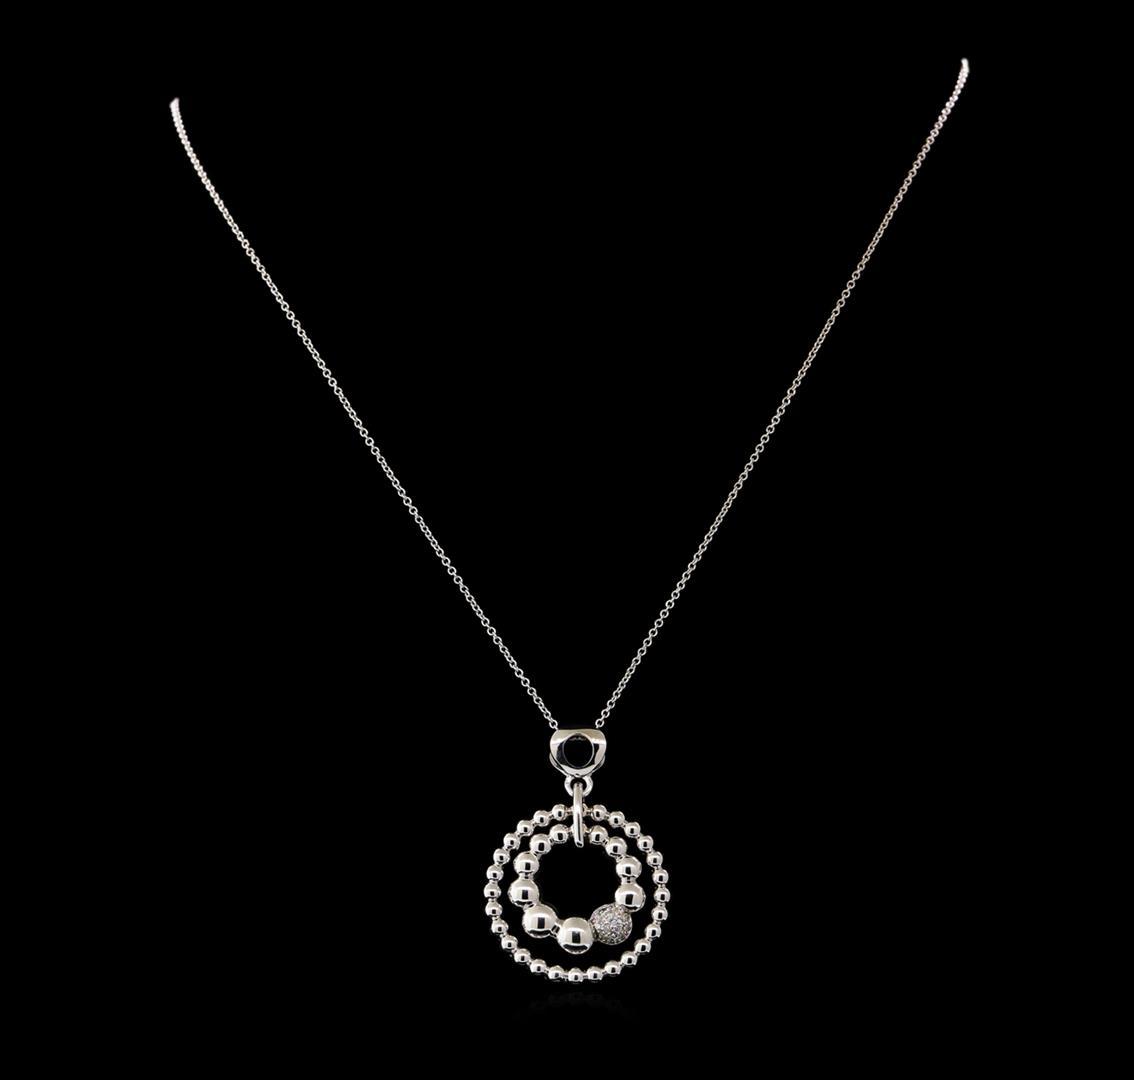 0.12 ctw Diamond Pendant With Chain - 14KT White Gold